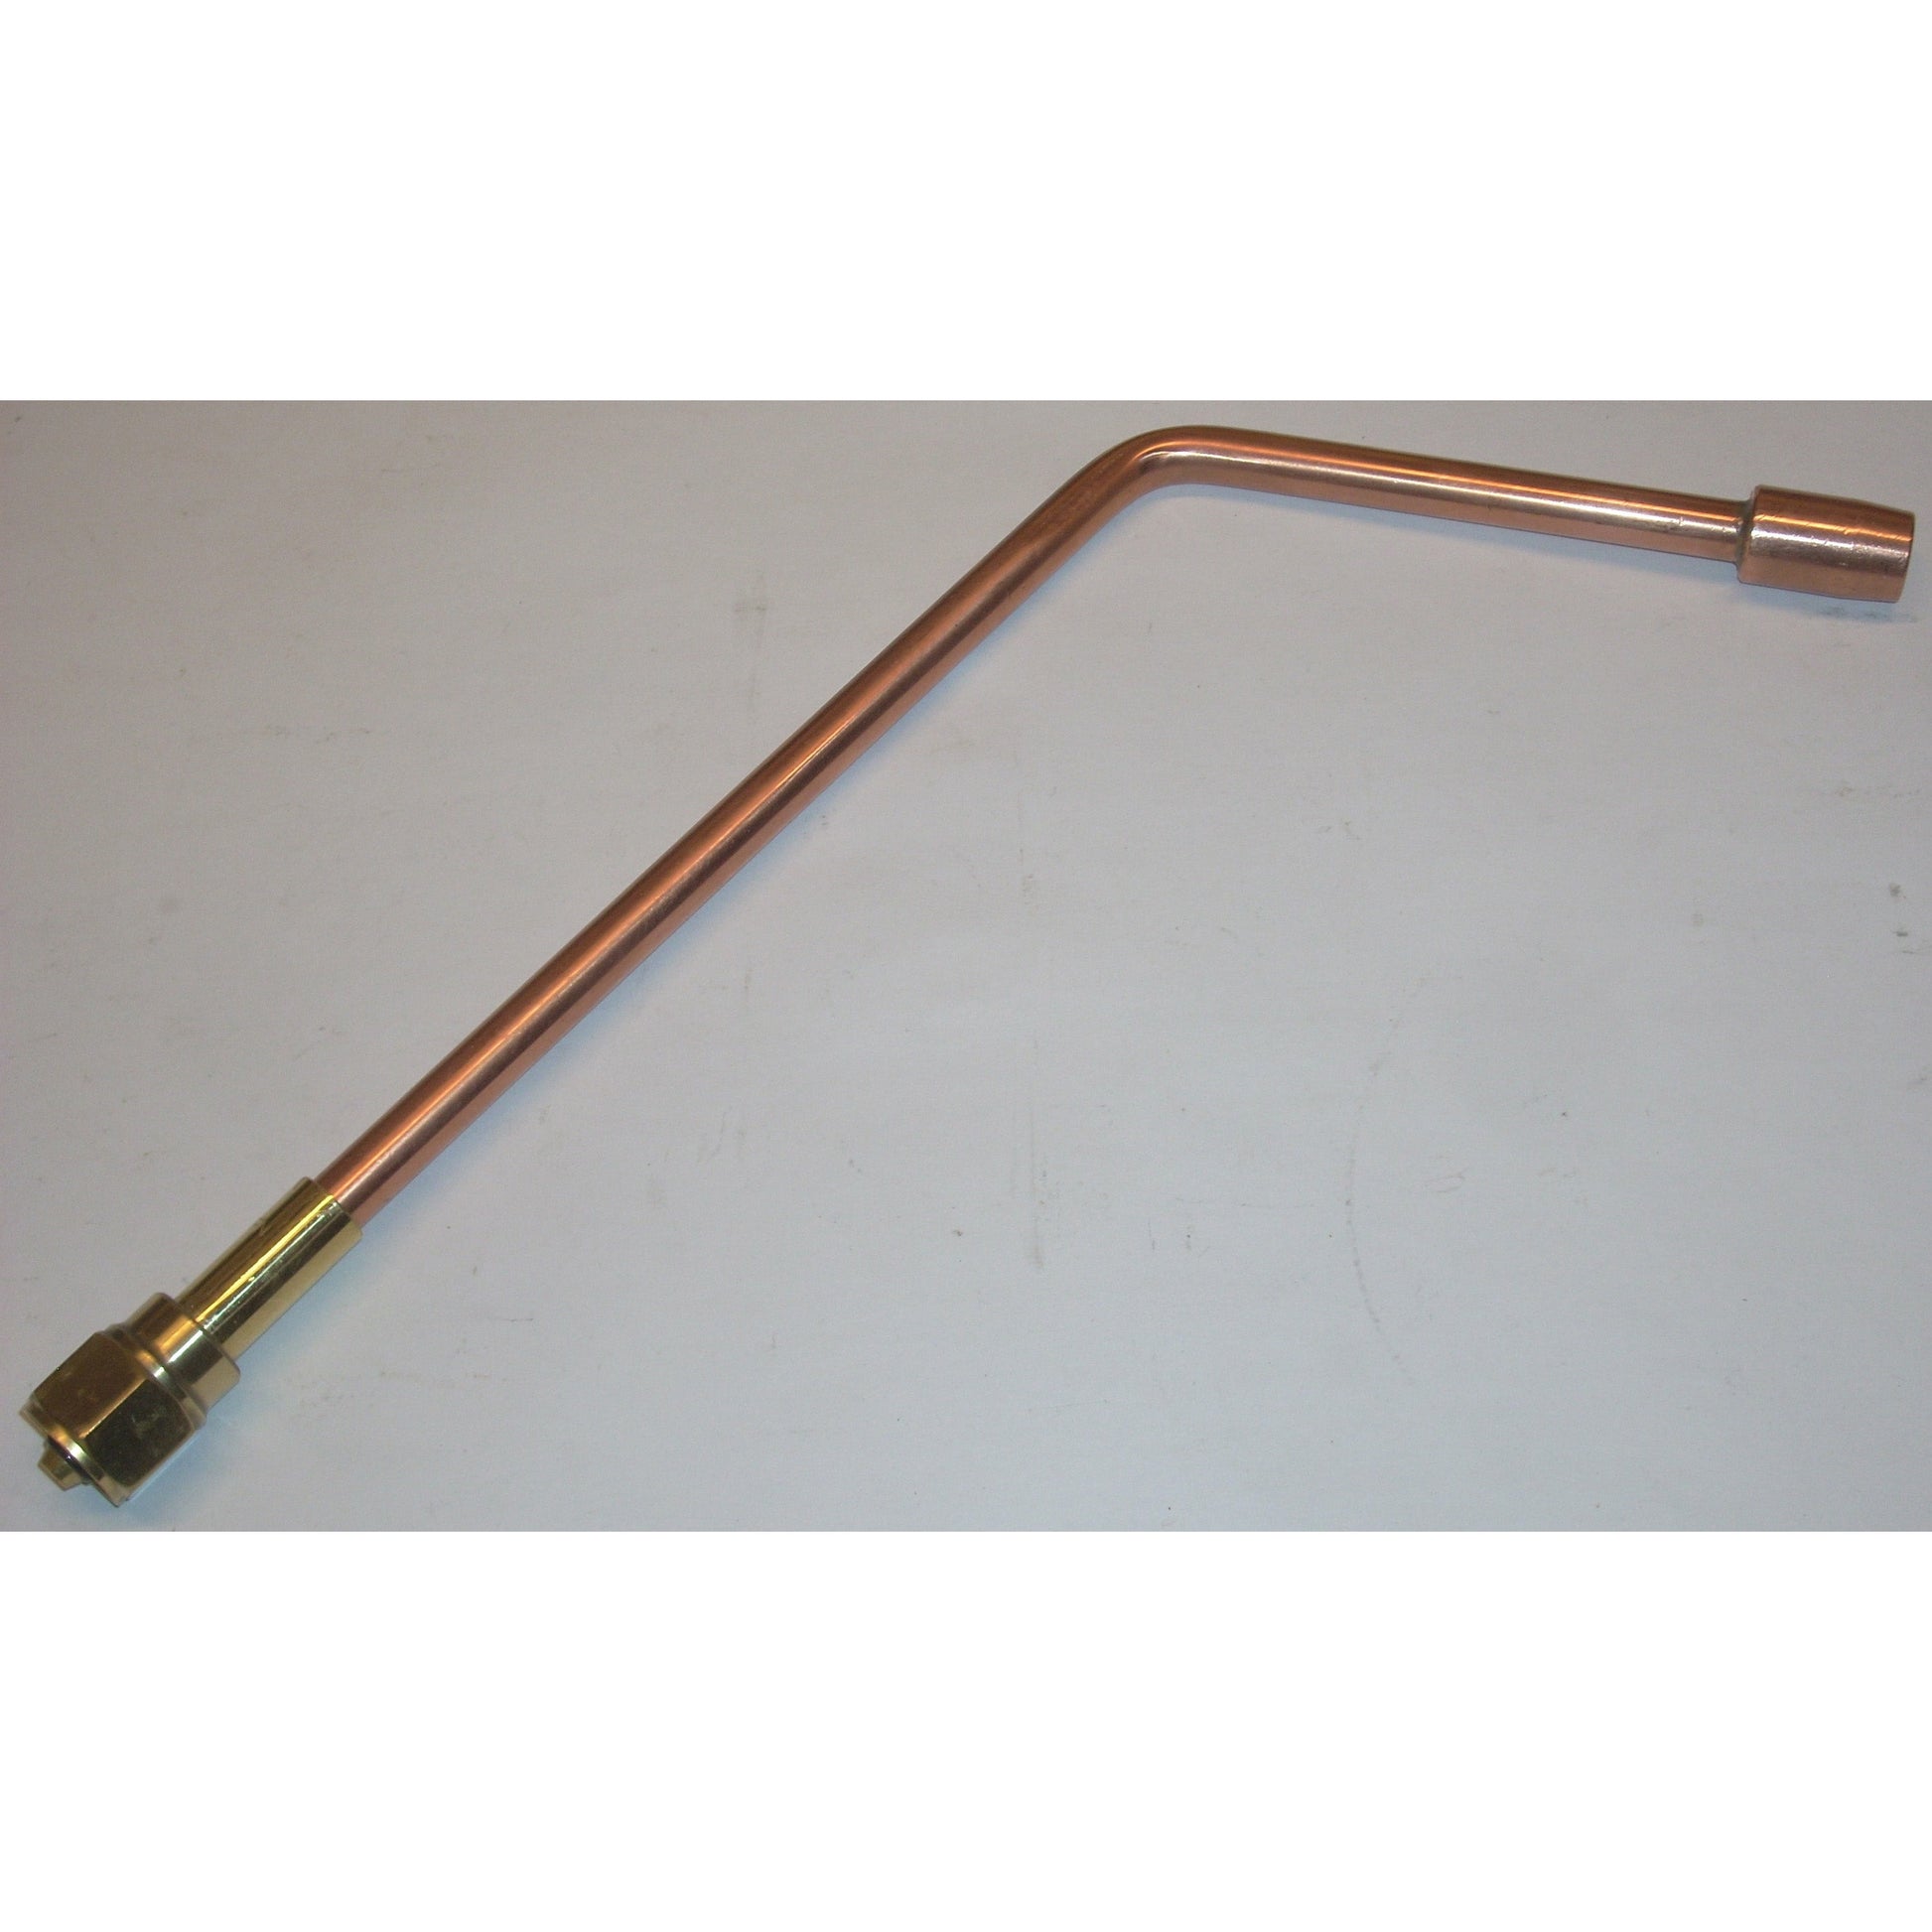 Victor style 10-MFN Heating Tip Rosebud for LP, Propane or Natural Gas - ATL Welding Supply